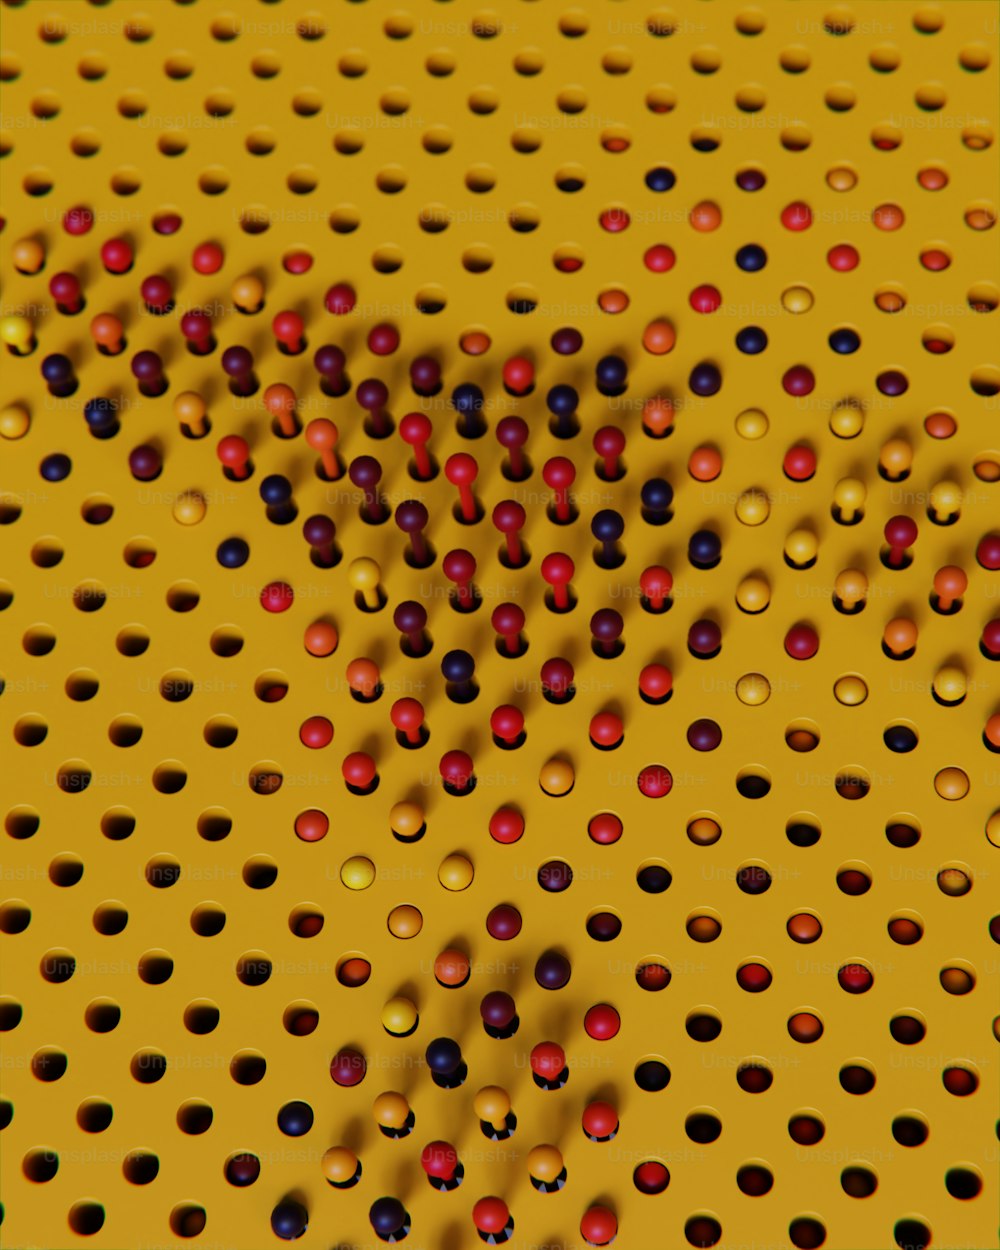 a yellow perfored surface with red and blue balls